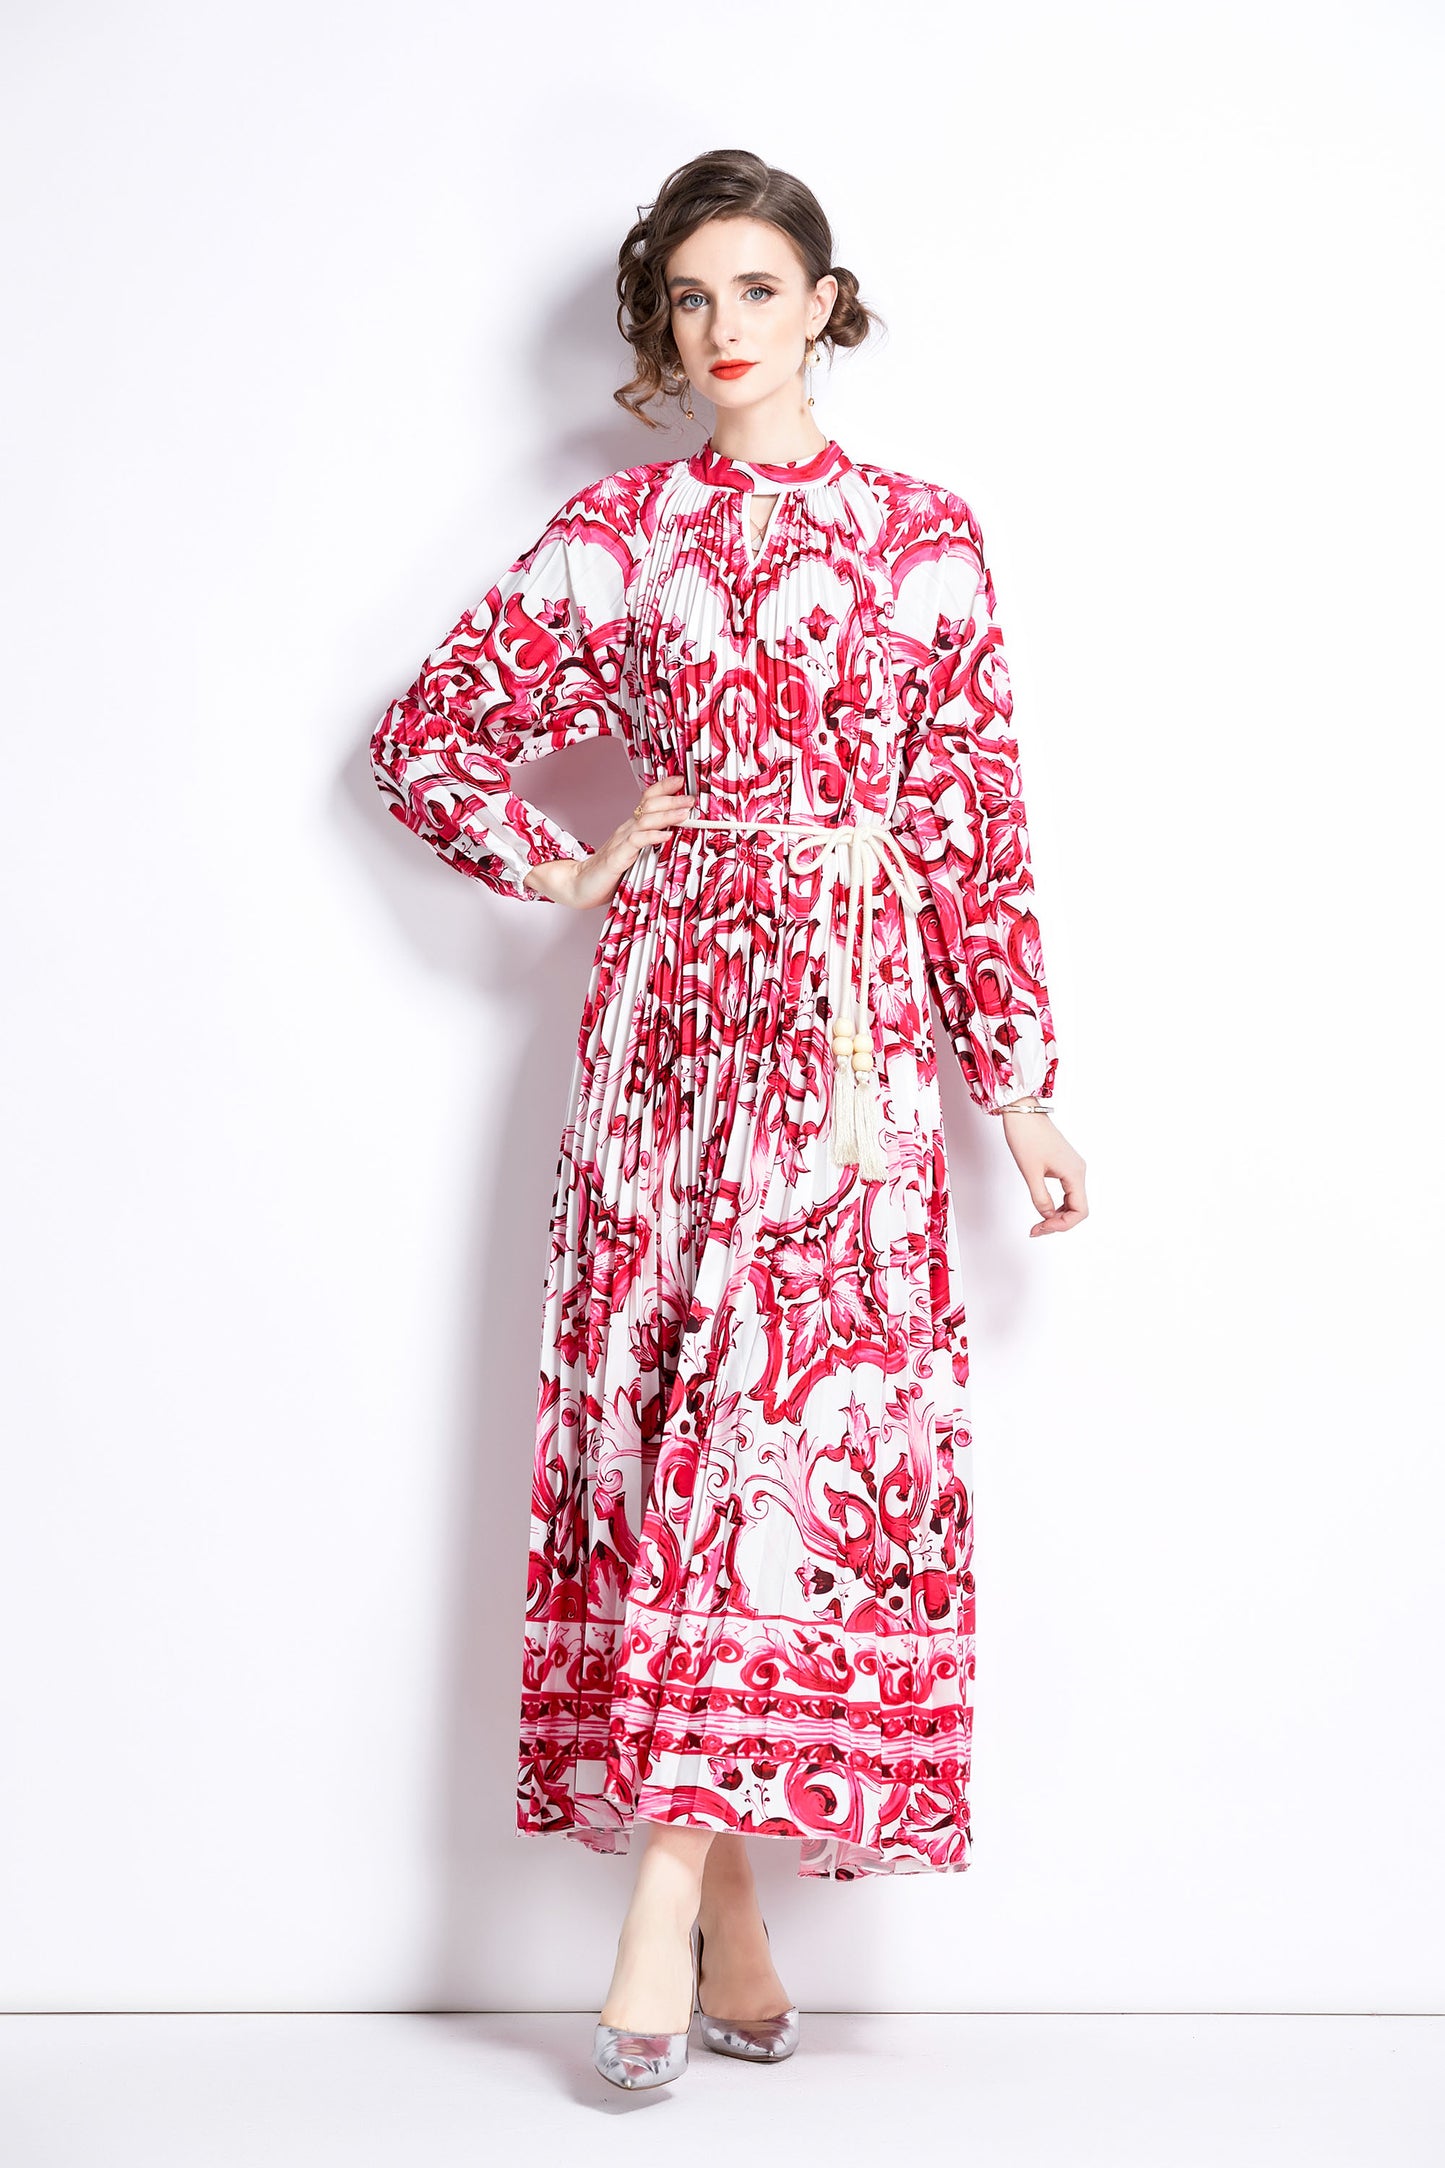 Women's Elegant Floral Print Pleated Round Neck Long Sleeves Loose Swing Party Dress